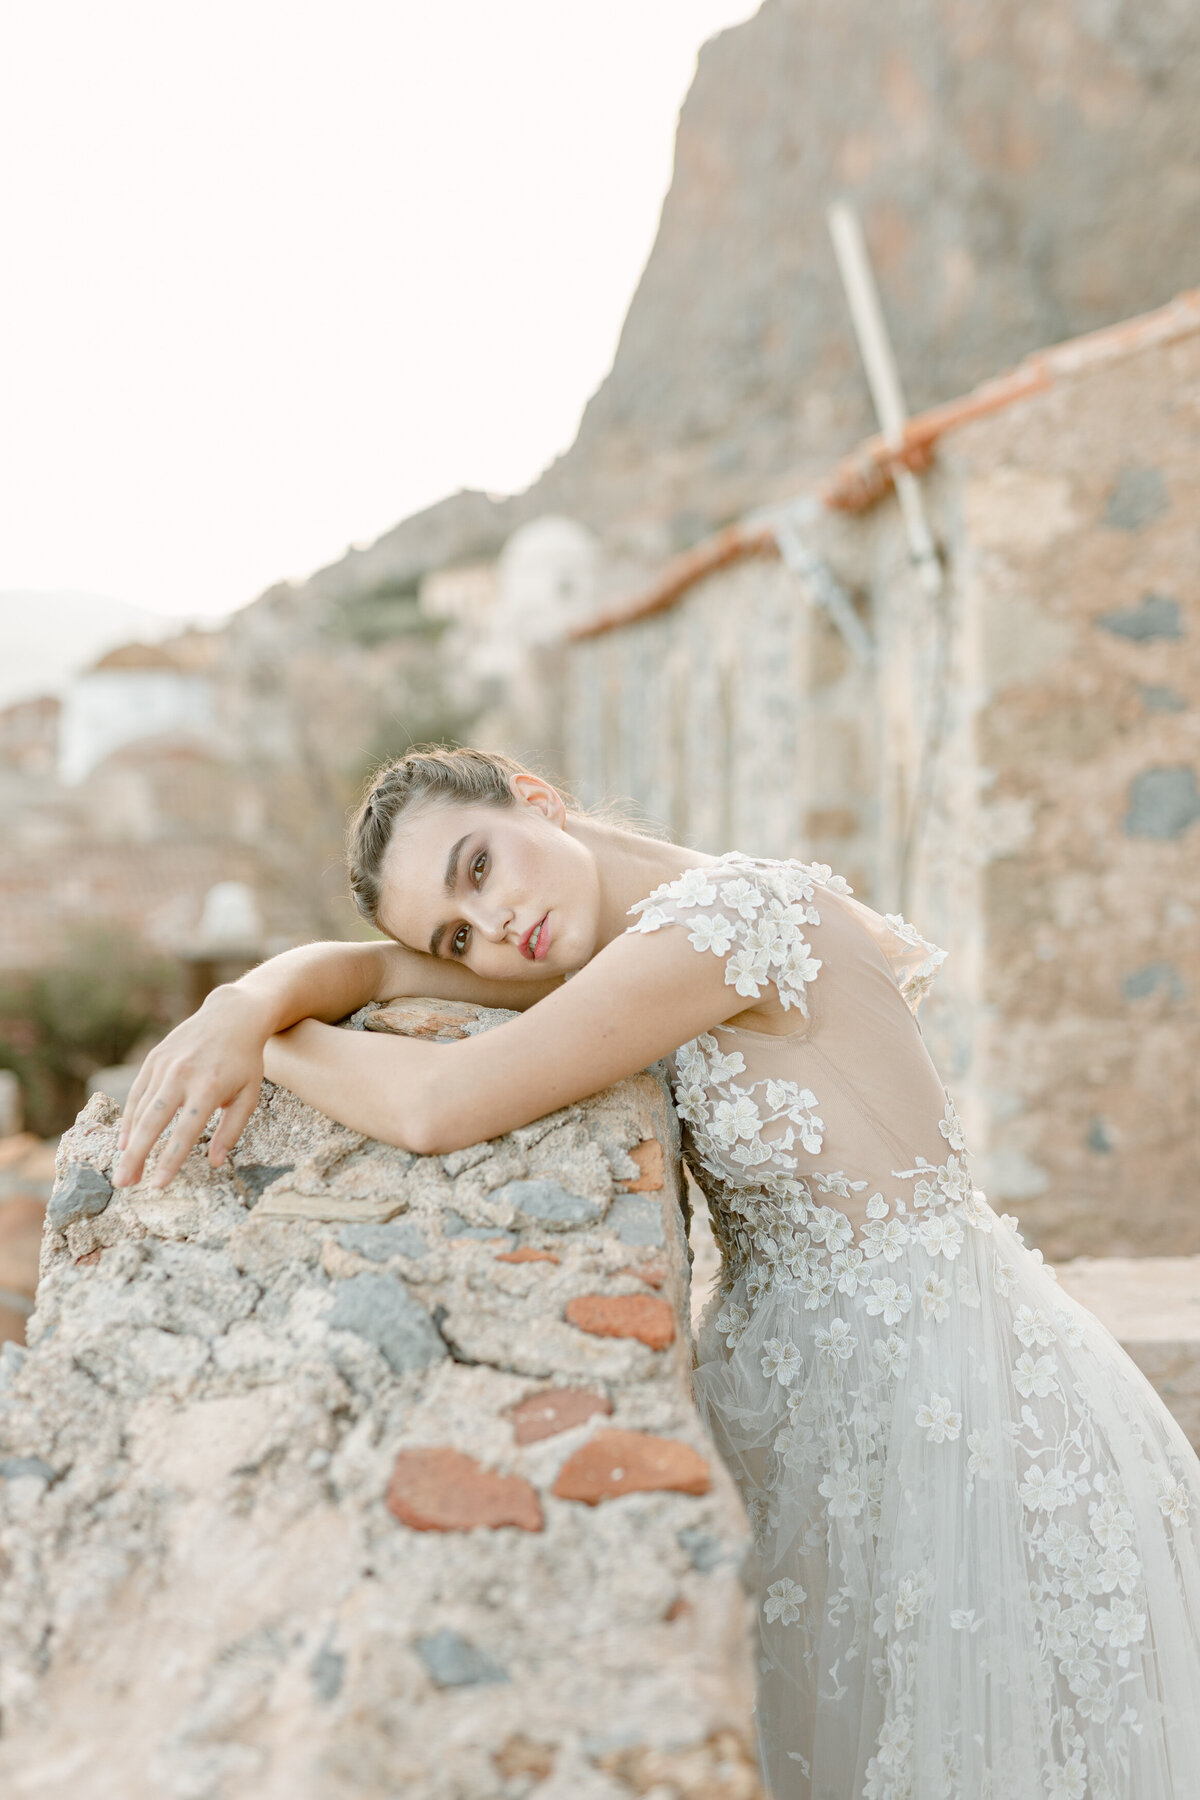 Bridal Gown Portrait Editorial Photoshoot in Greece 5